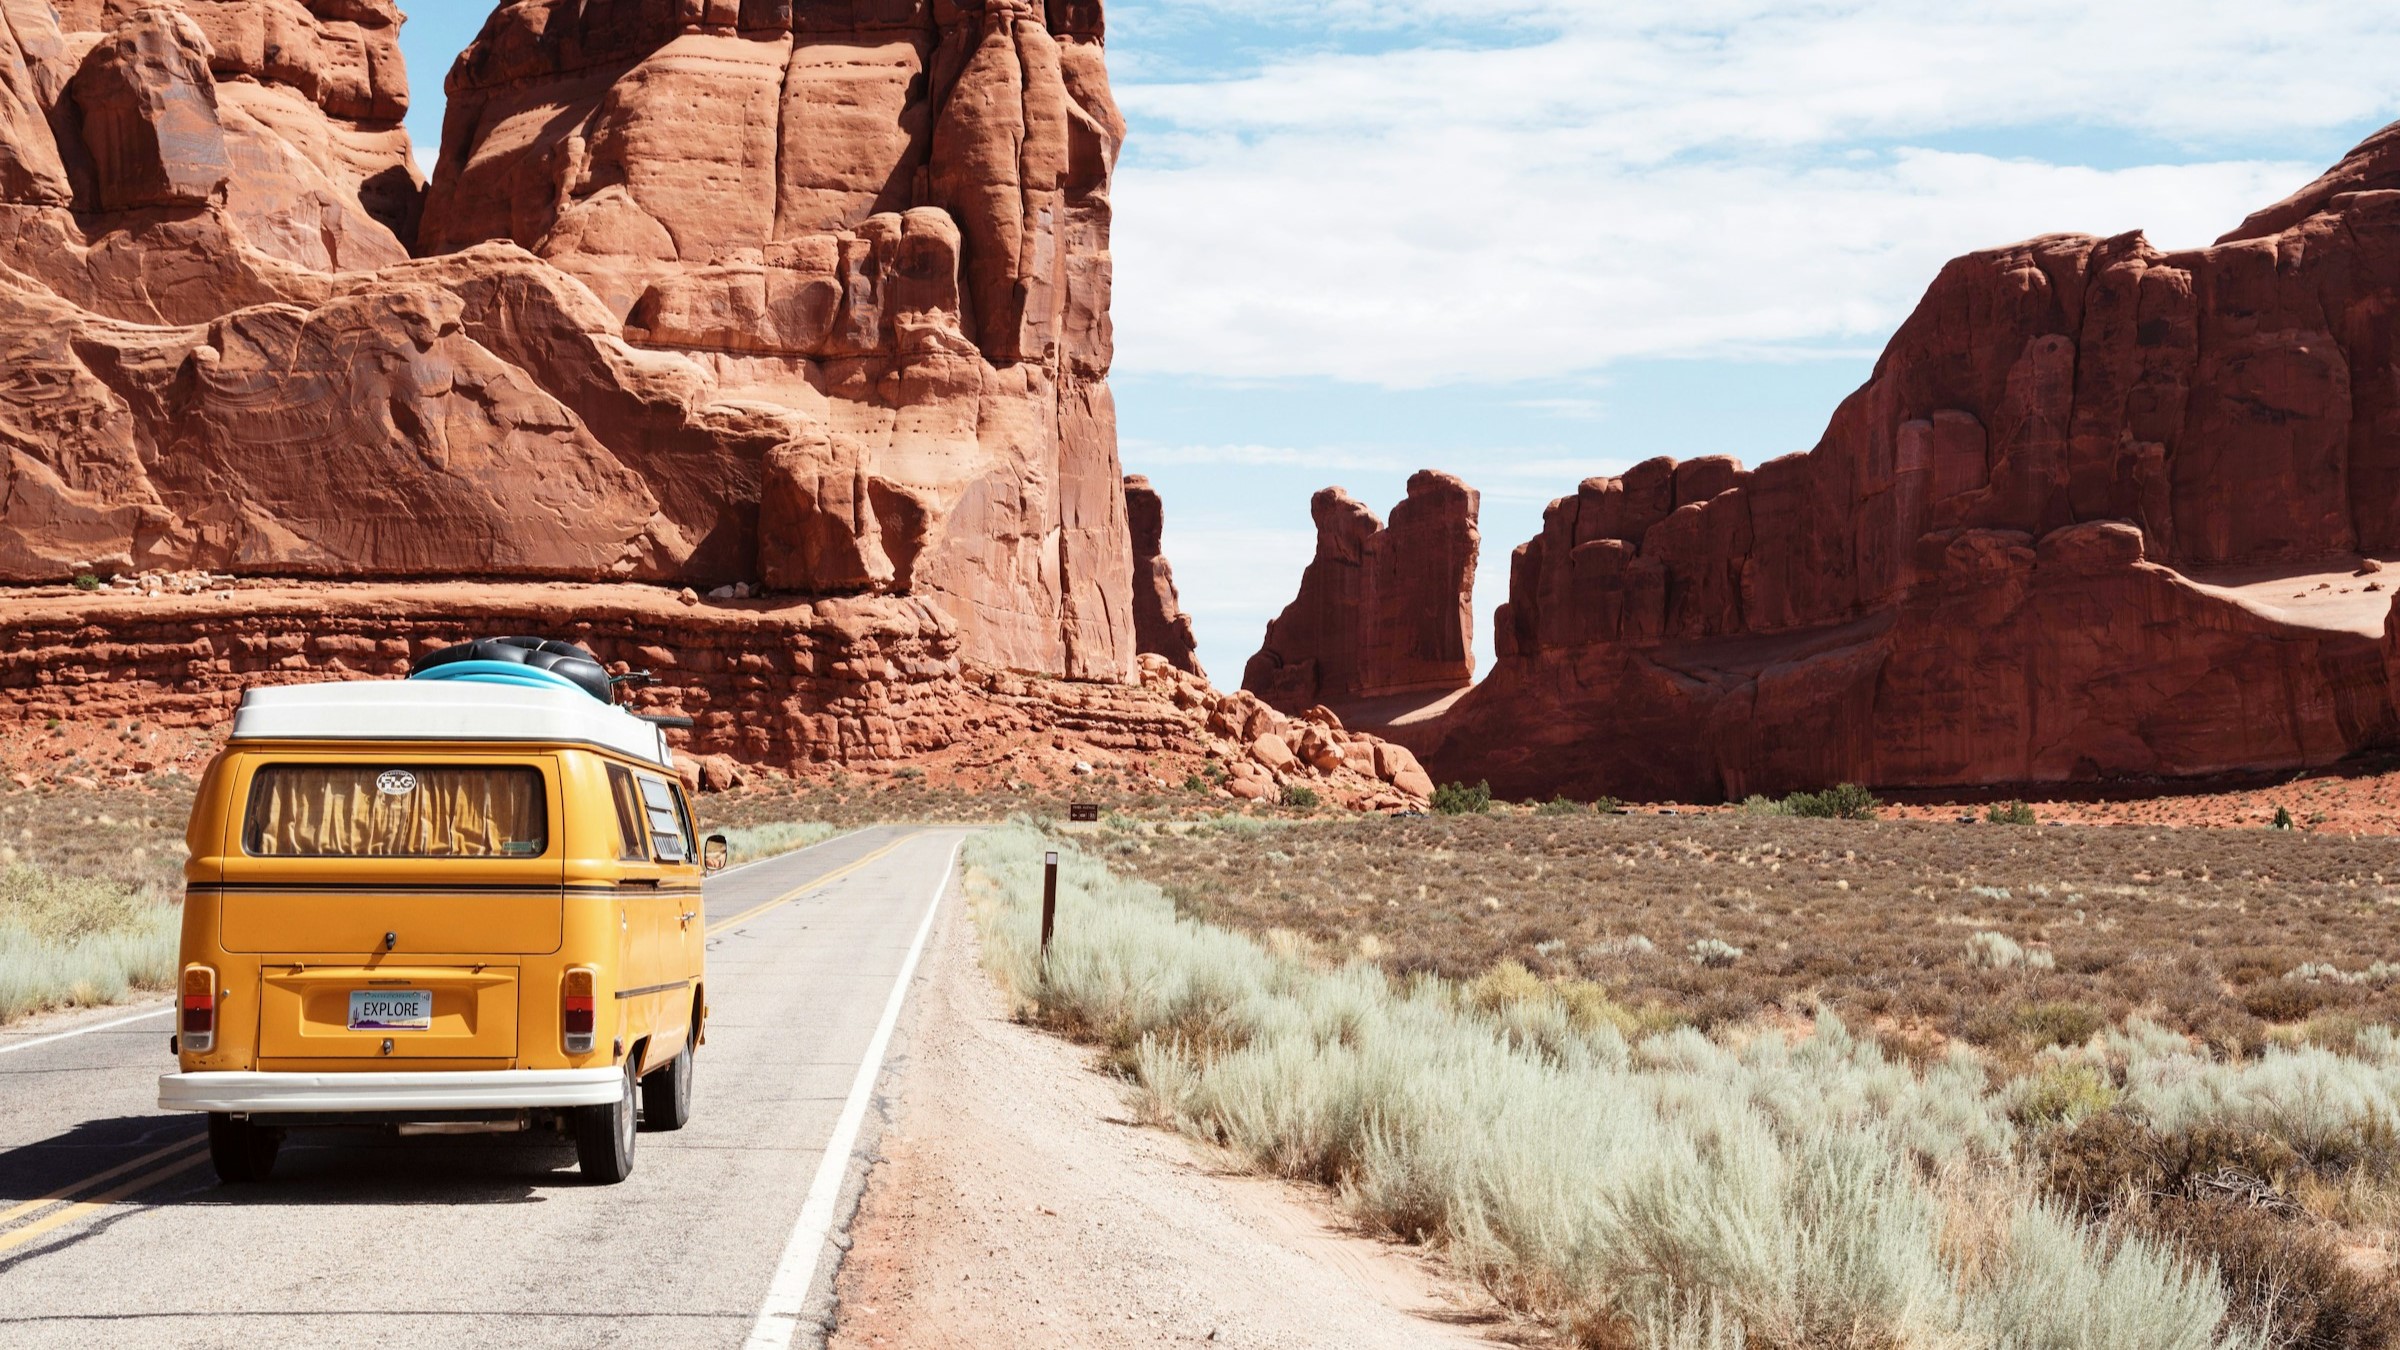 7 Best Apps for RV Travel That Will Amaze You